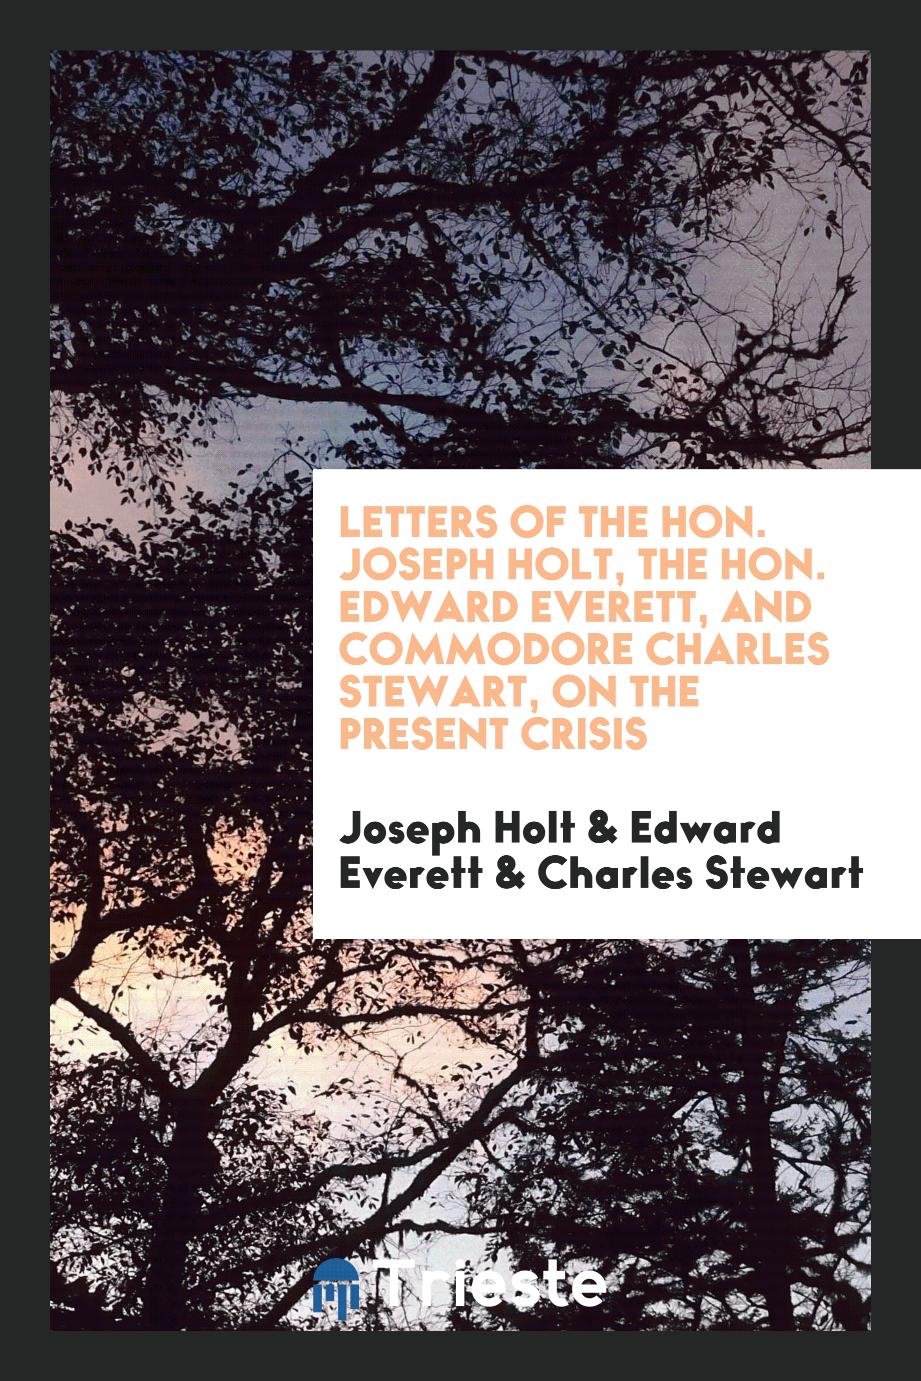 Letters of the Hon. Joseph Holt, the Hon. Edward Everett, and Commodore Charles Stewart, on the present crisis